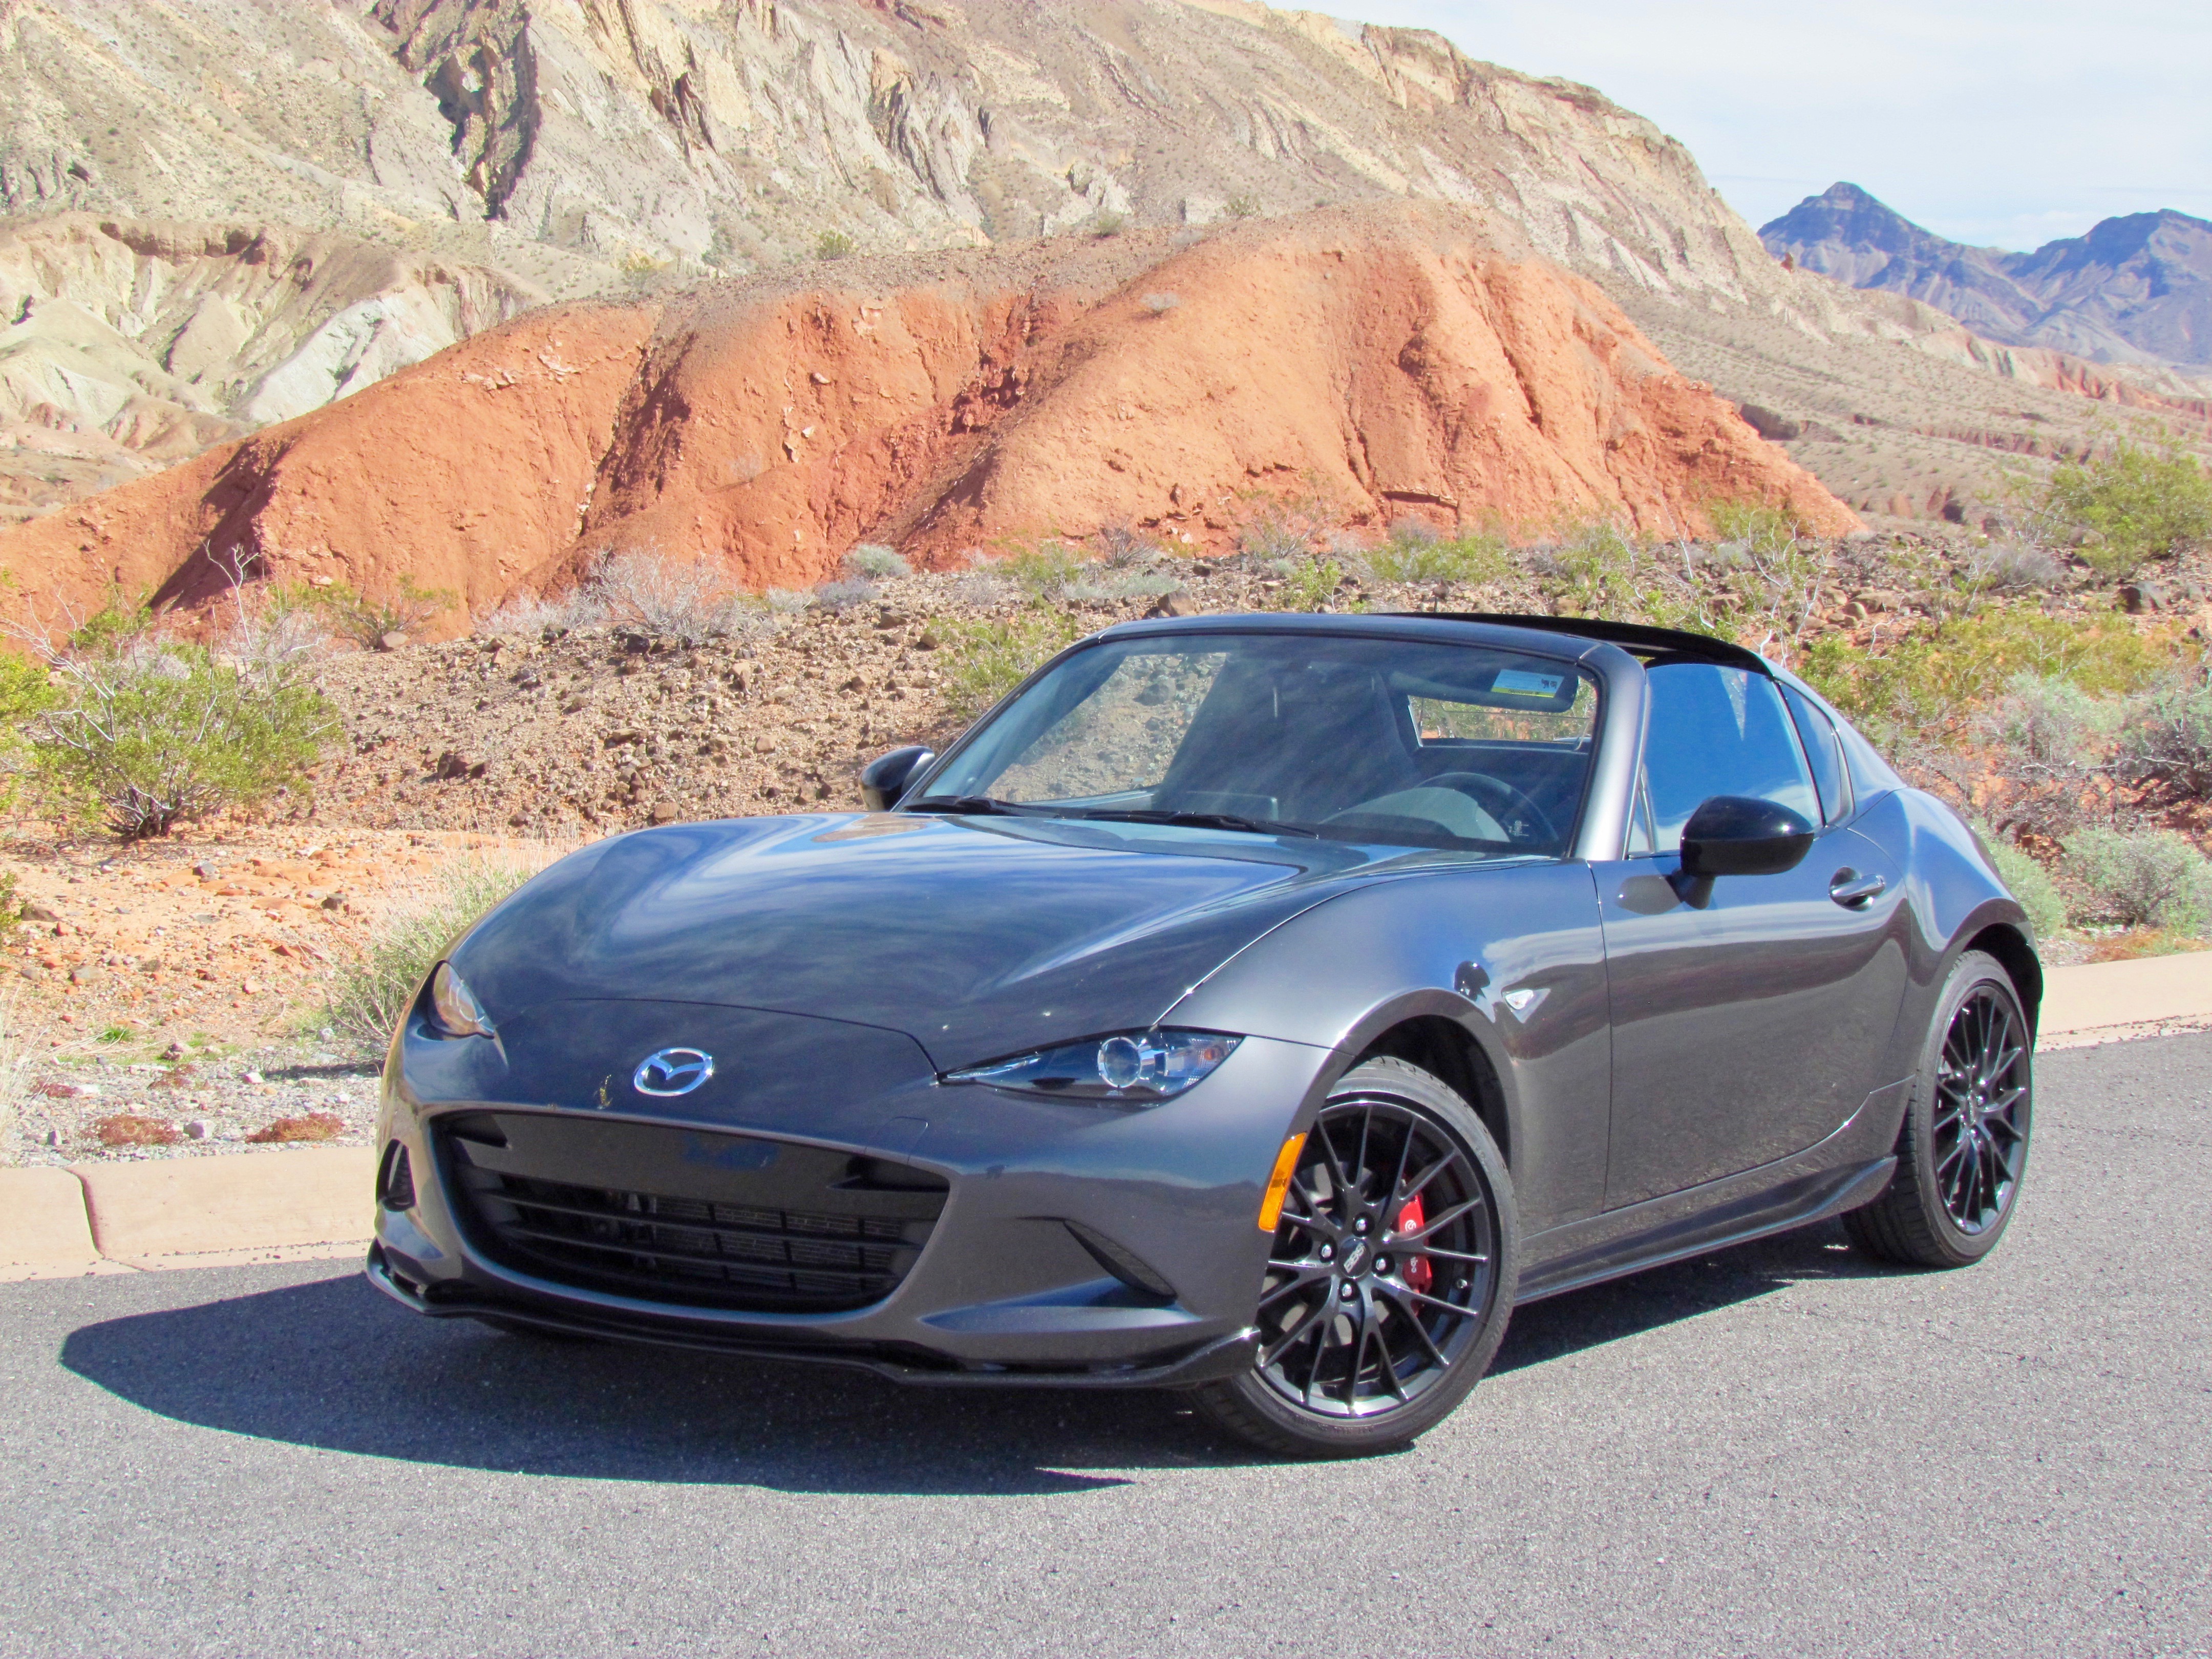 , Question of the Day: Do you like the Mazda Miata?, ClassicCars.com Journal